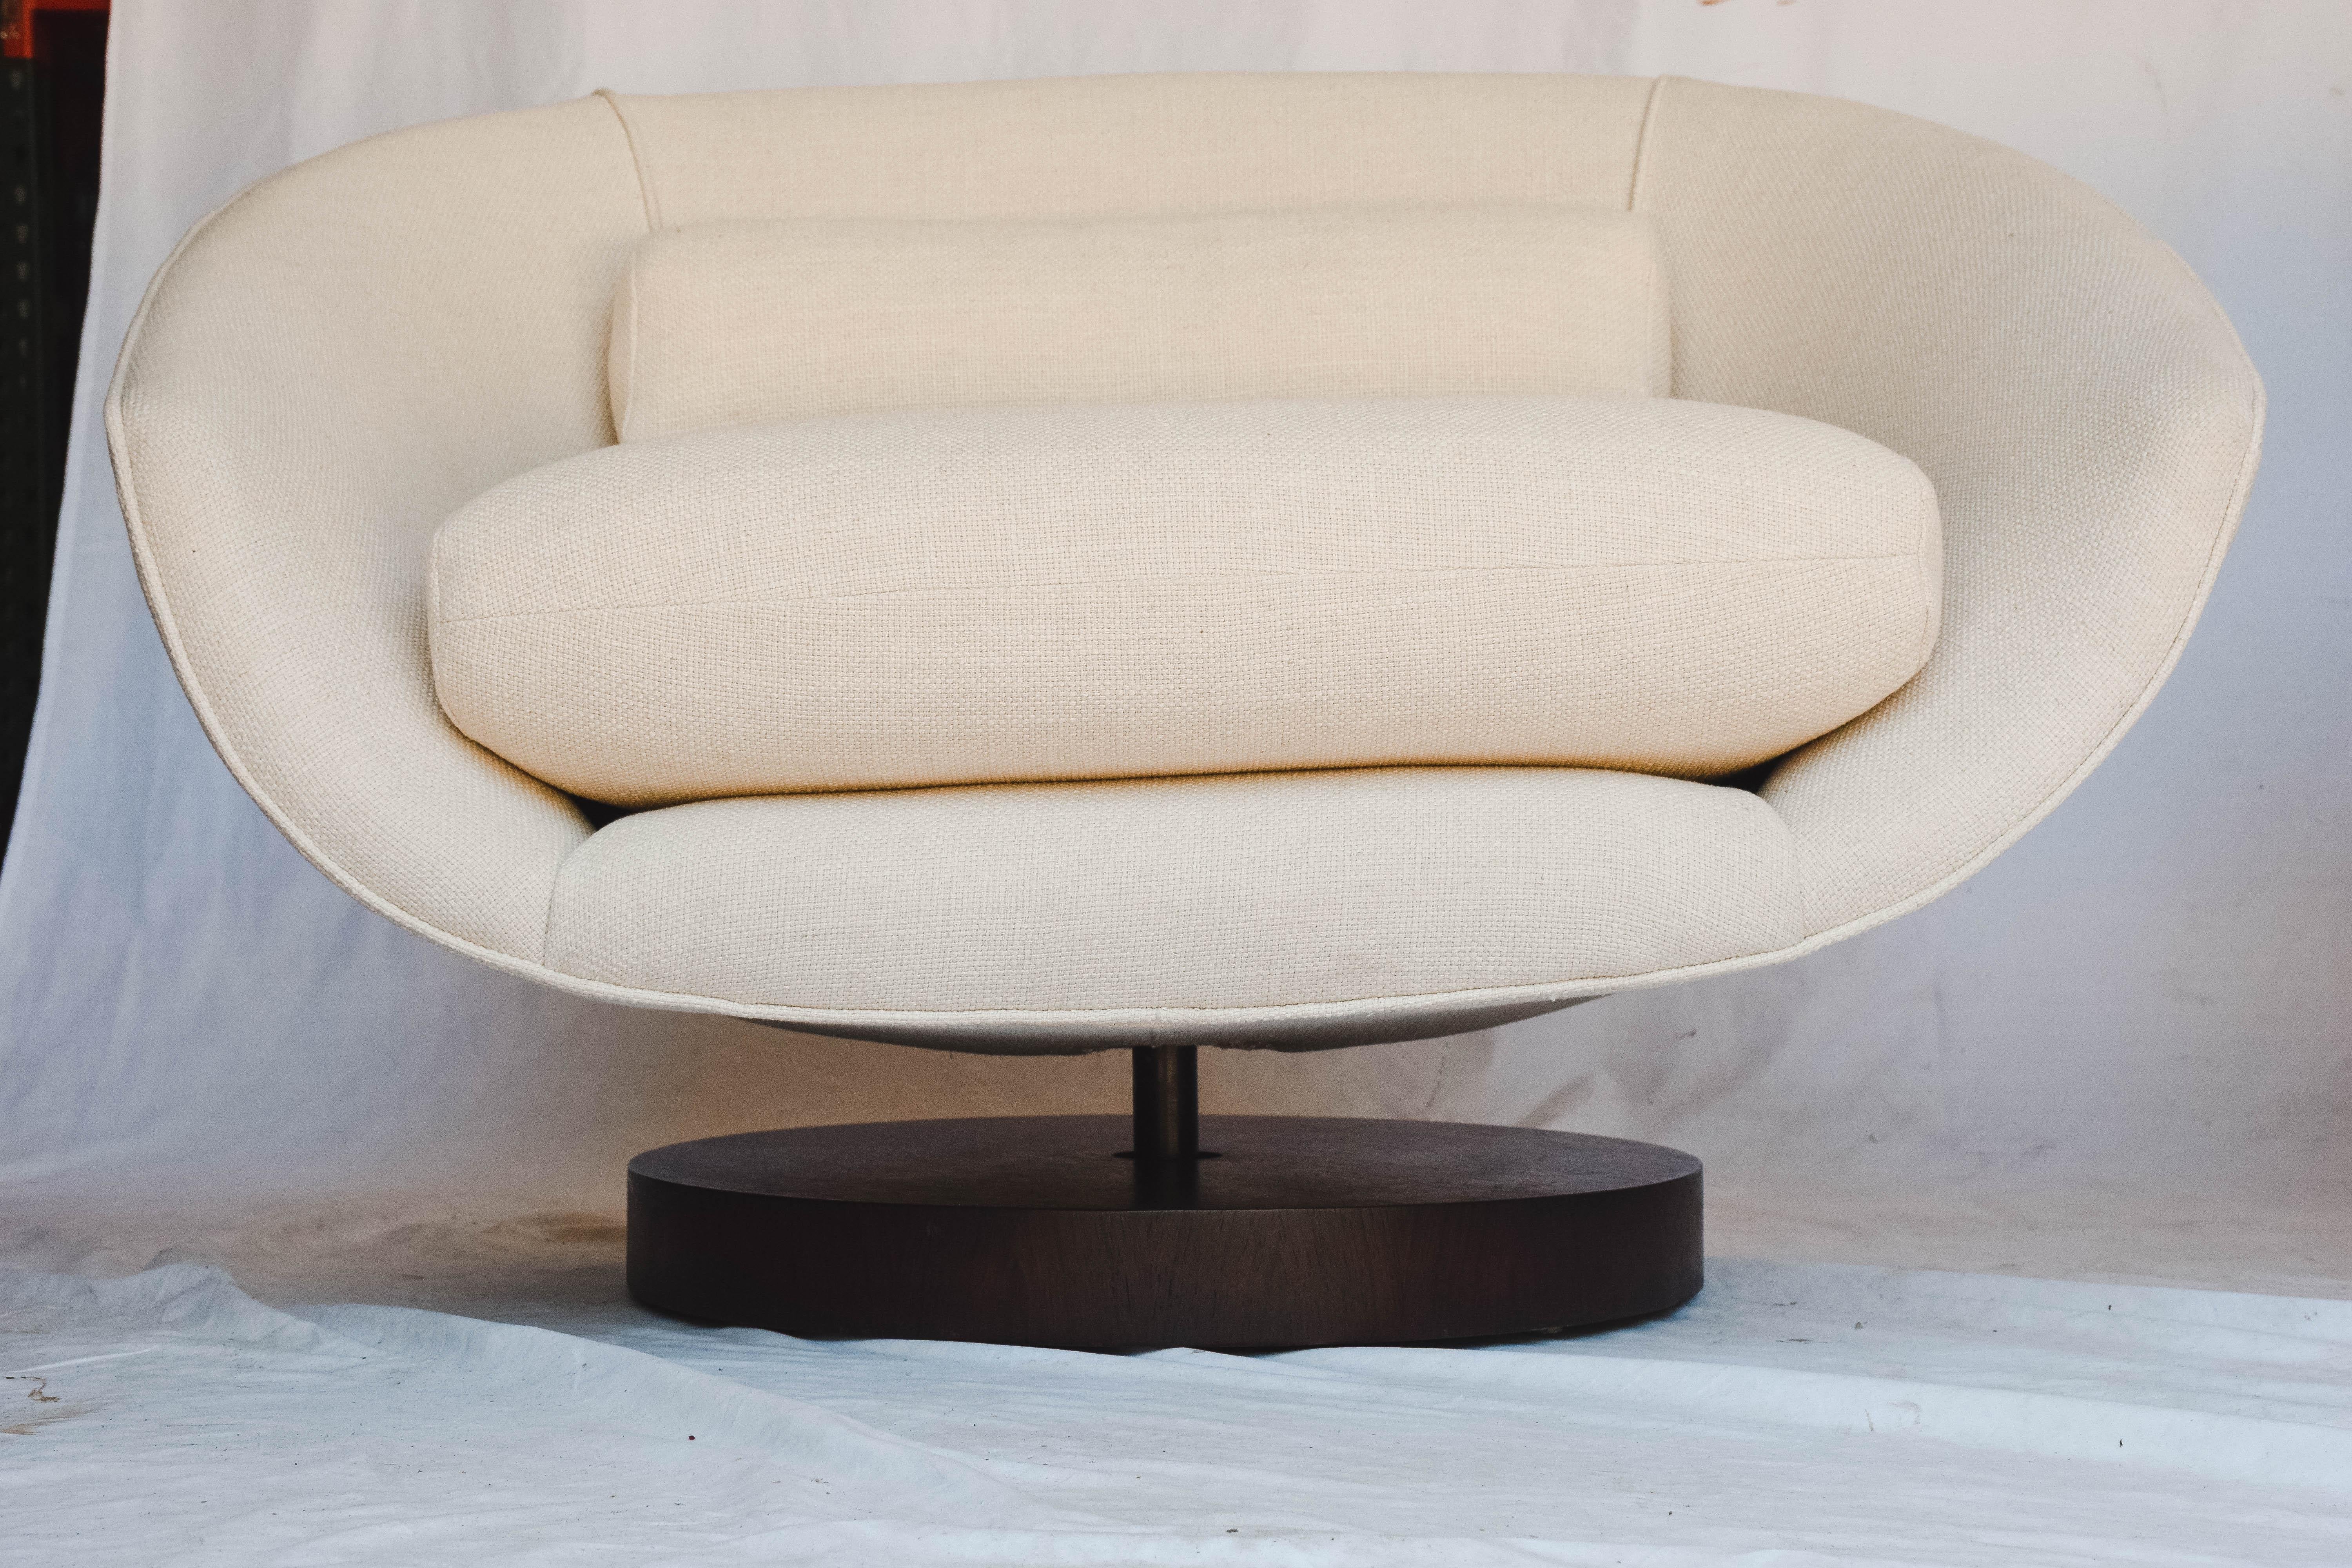 This beautiful pair of Mid-Century Modern lounge chairs have the ability to swivel and tilt with a versatile round wood base in the style of Milo Baughman. The pair of chairs are newly upholstered in a linen blend fabric, and feature a removable